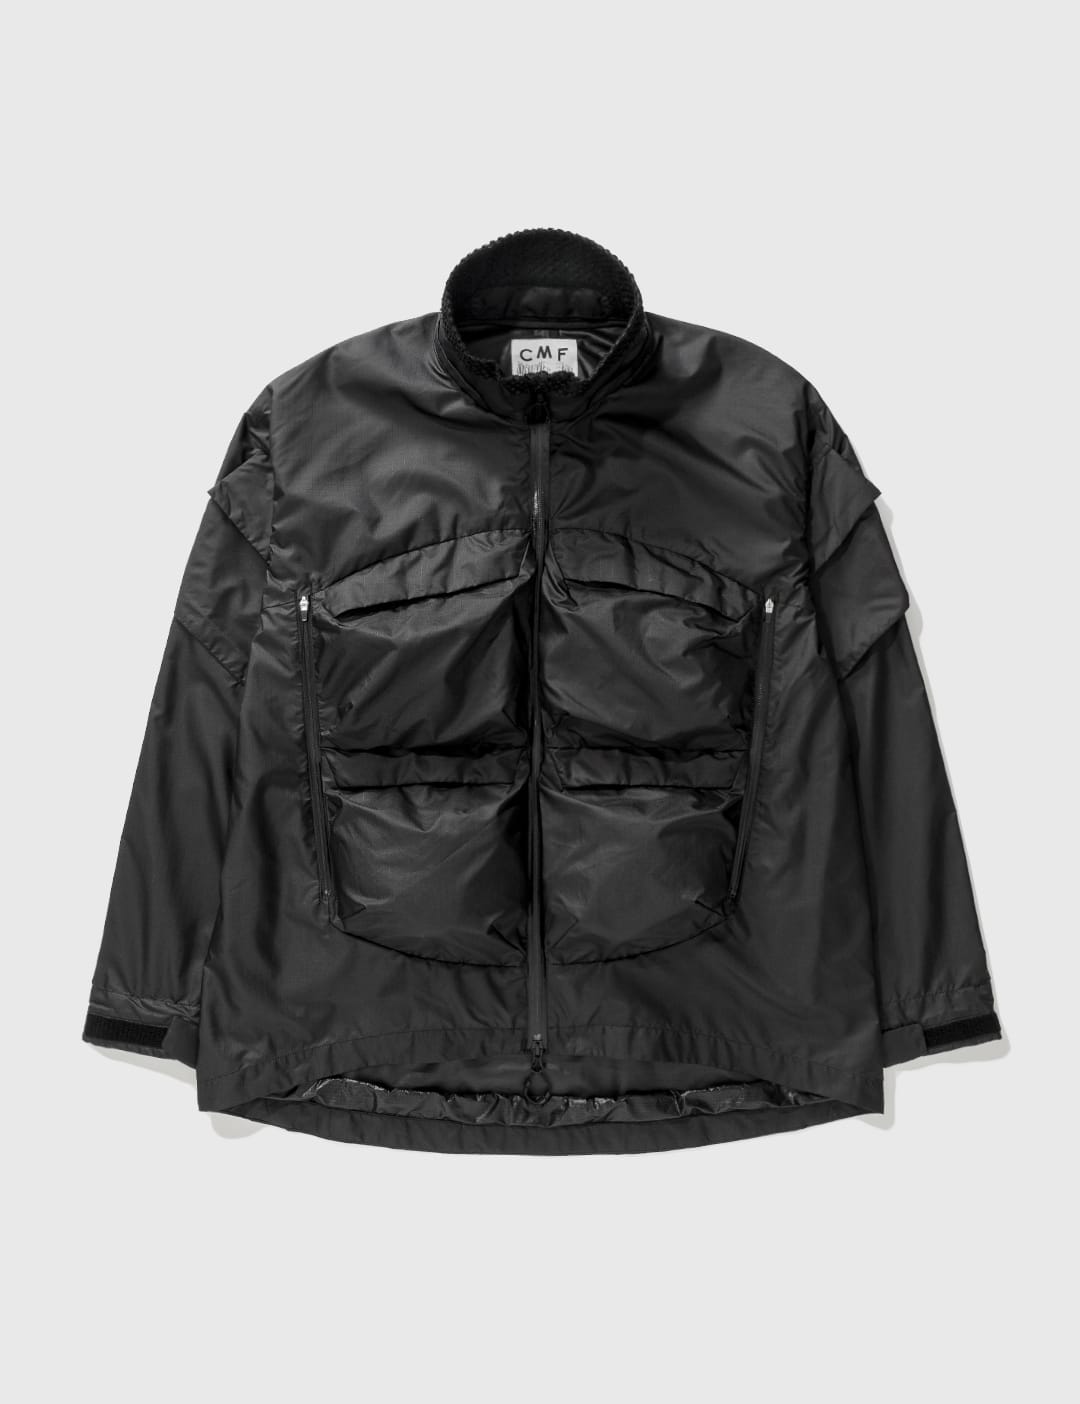 Comfy Outdoor Garment - Sling Shot MOD Jacket | HBX - Globally Curated  Fashion and Lifestyle by Hypebeast